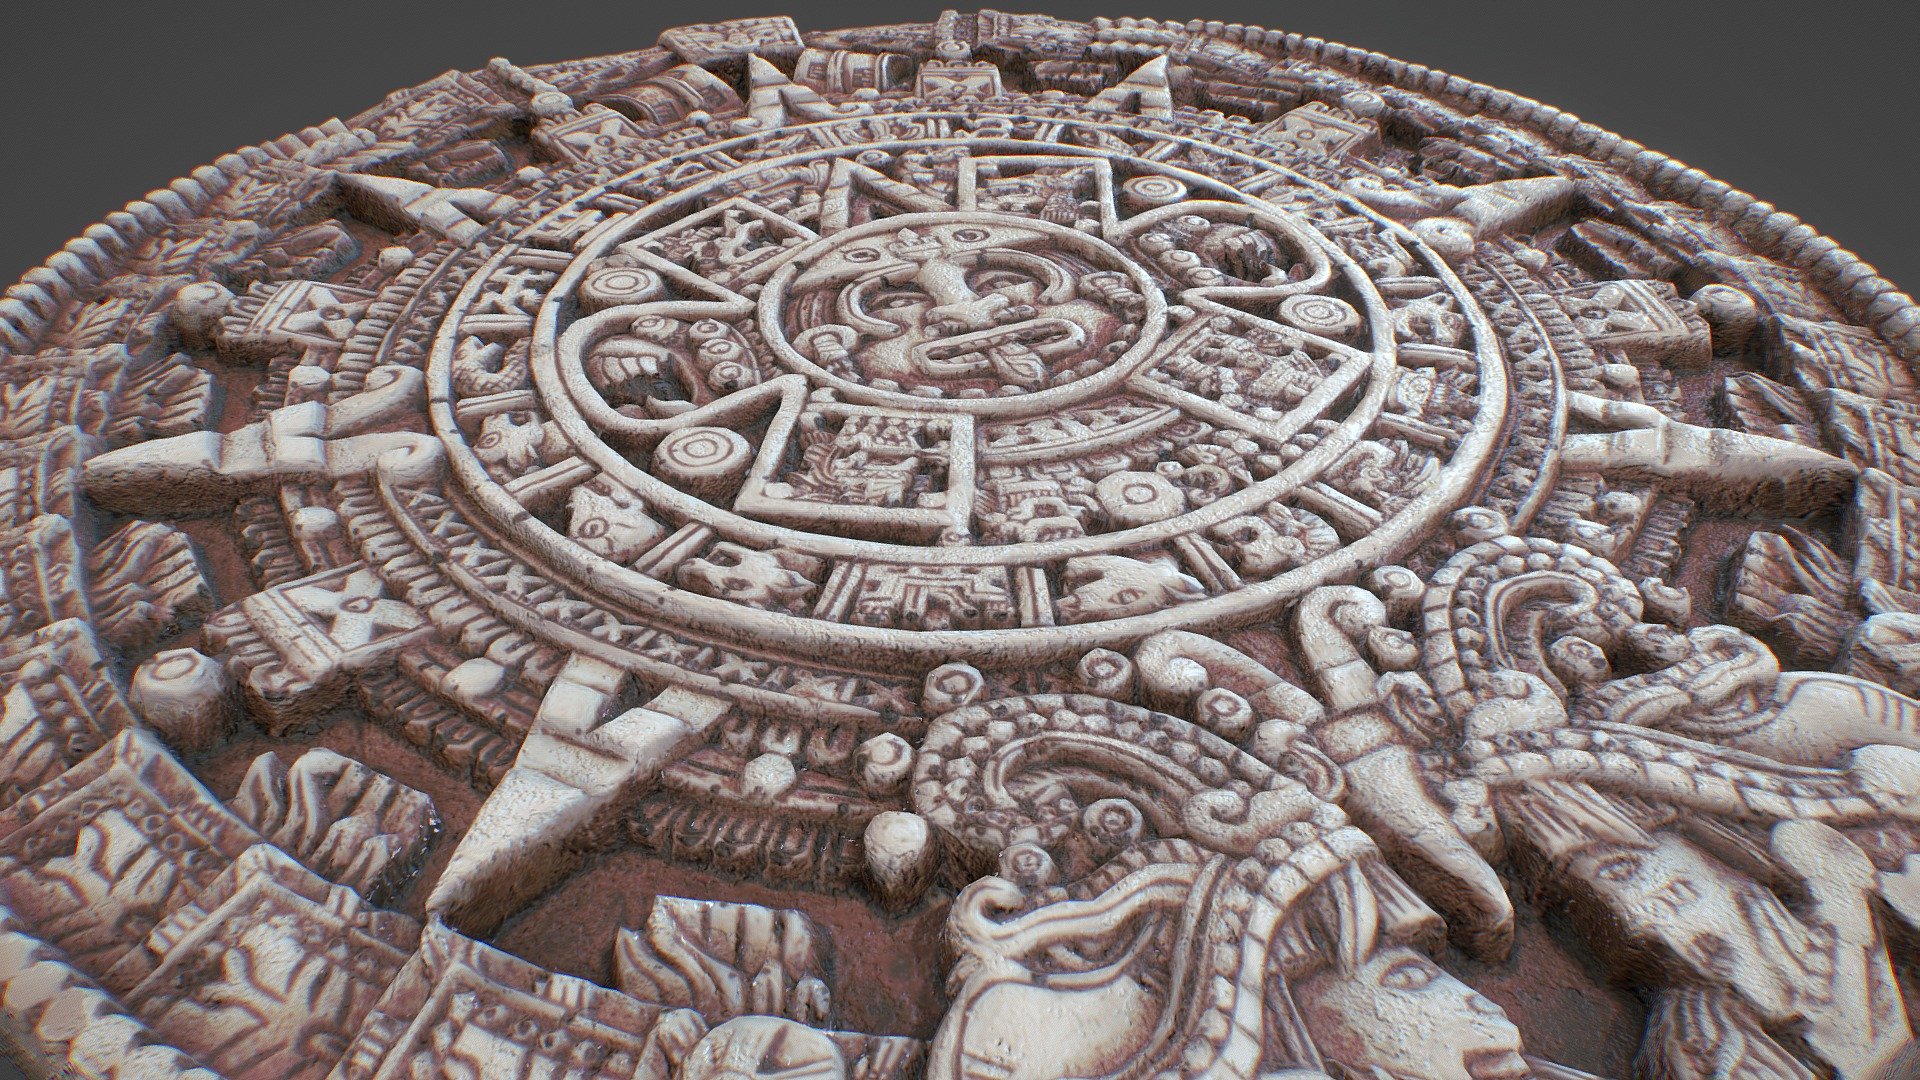 While on vacation to Mexico, I picked up this aztec calendar to scan. It's well crafted and has lots of height relief 3d model